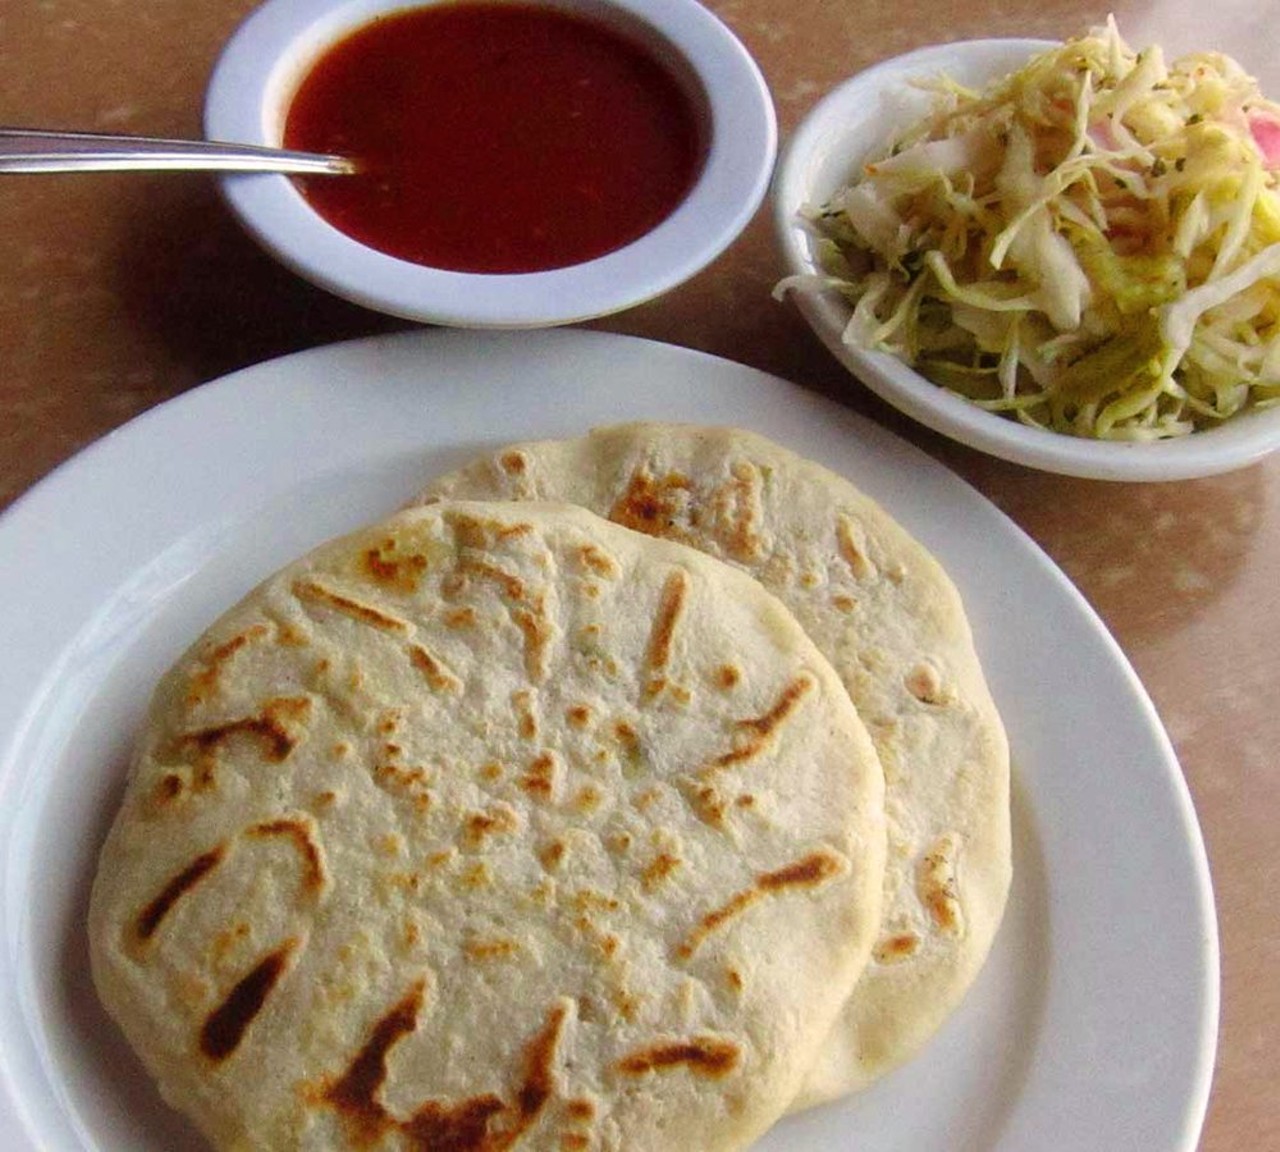 Pupuser&iacute;a y Restaurante Salvadore&ntilde;o 
Detroit | 3149 Livernois Ave. | (313) 899-4020 
A pupusa is a flat pancake stuffed with an assortment of different meats and/or cheeses. The menu is extensive and the possible combinations are limitless.